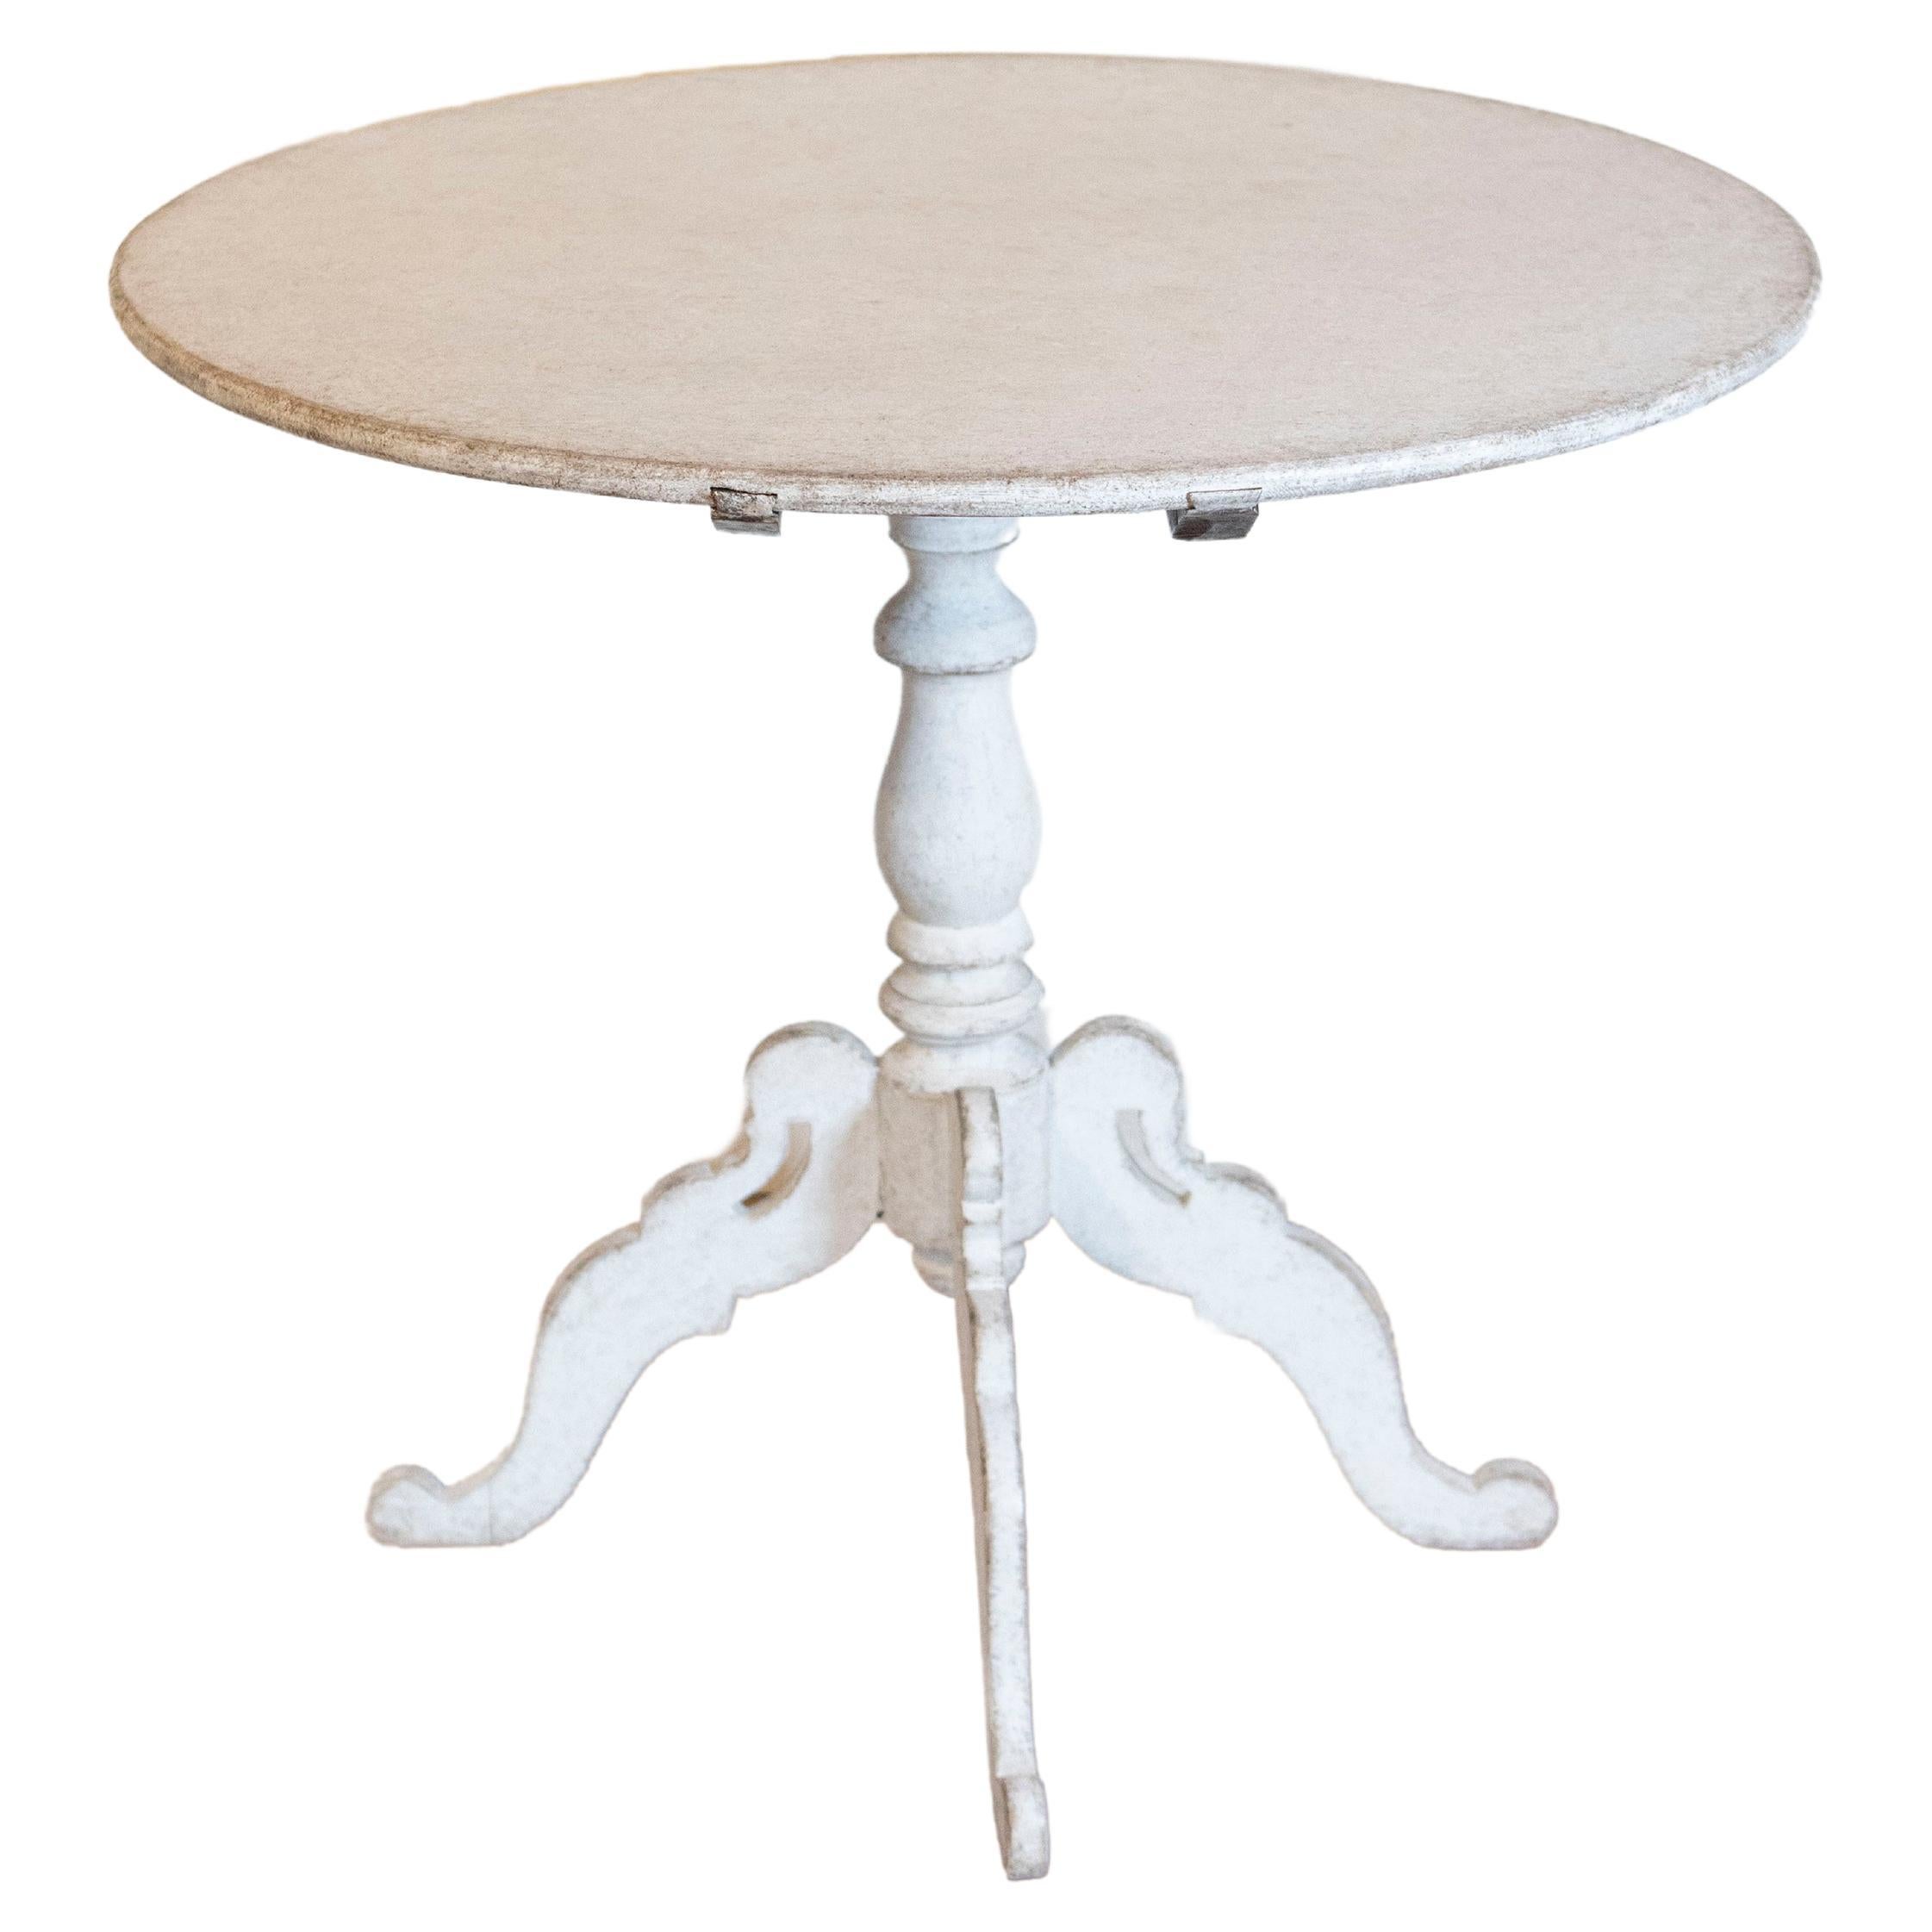 1860s Swedish Light Grey Painted Tilt-Top Table with Round Top and Carved Legs For Sale